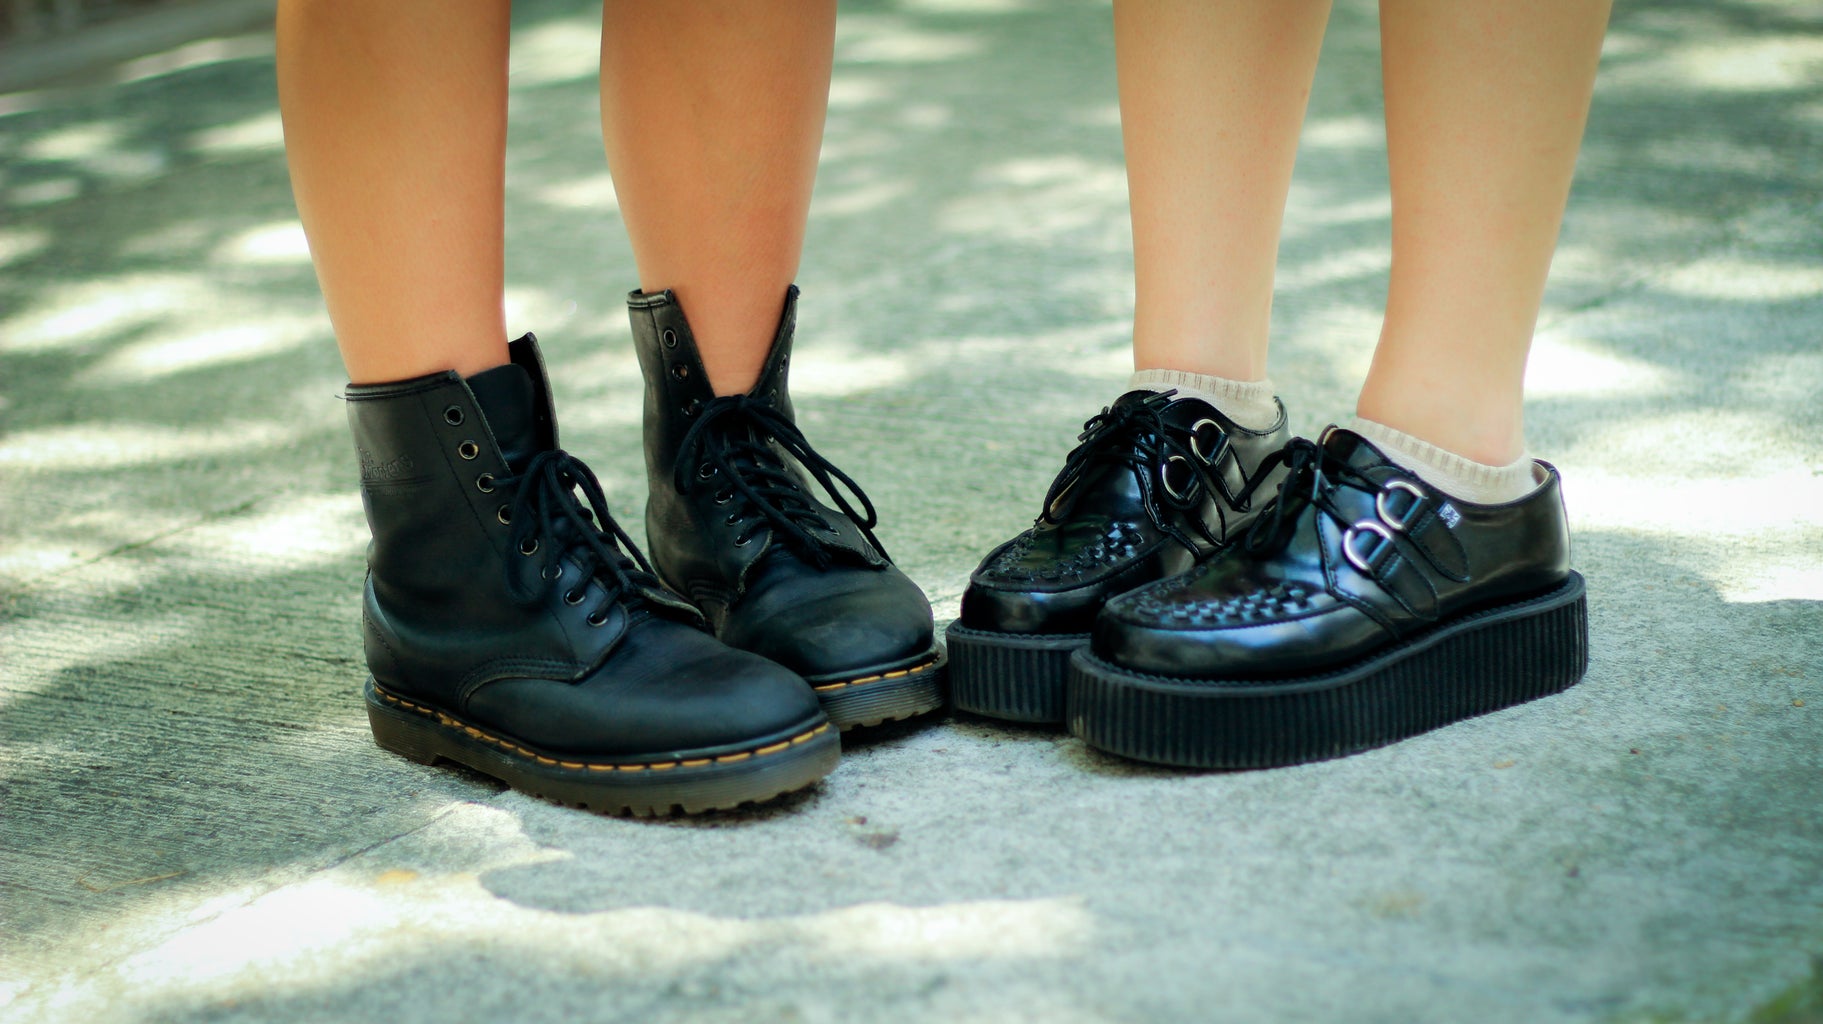 two pairs of platform black boots